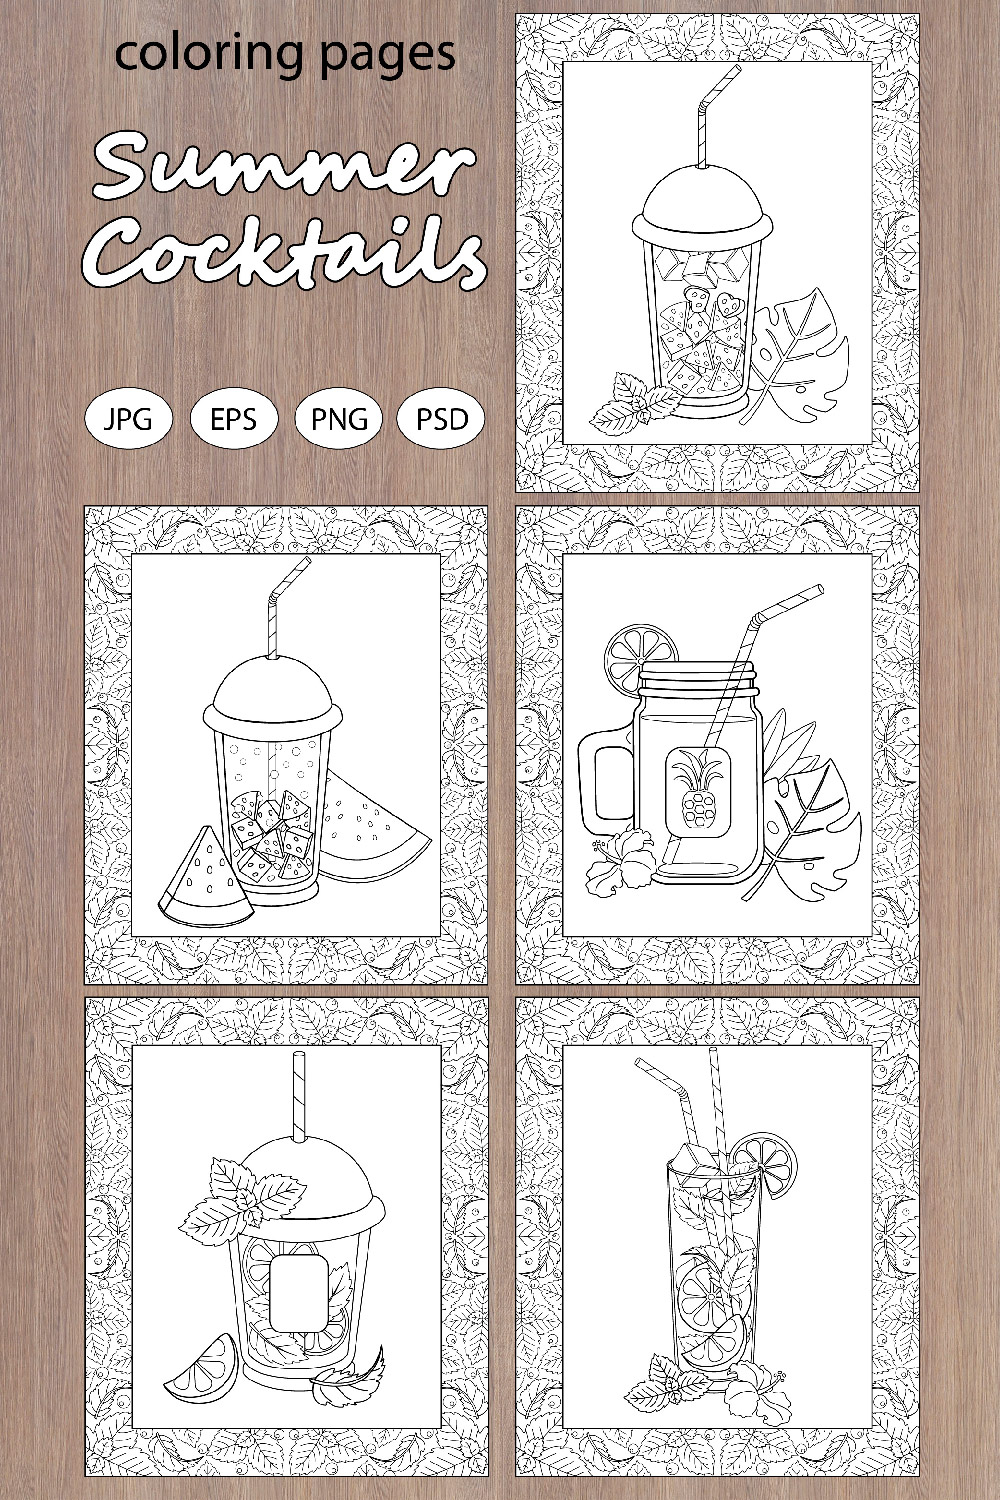 Summer Cocktails - 5 coloring pages pinterest preview image.